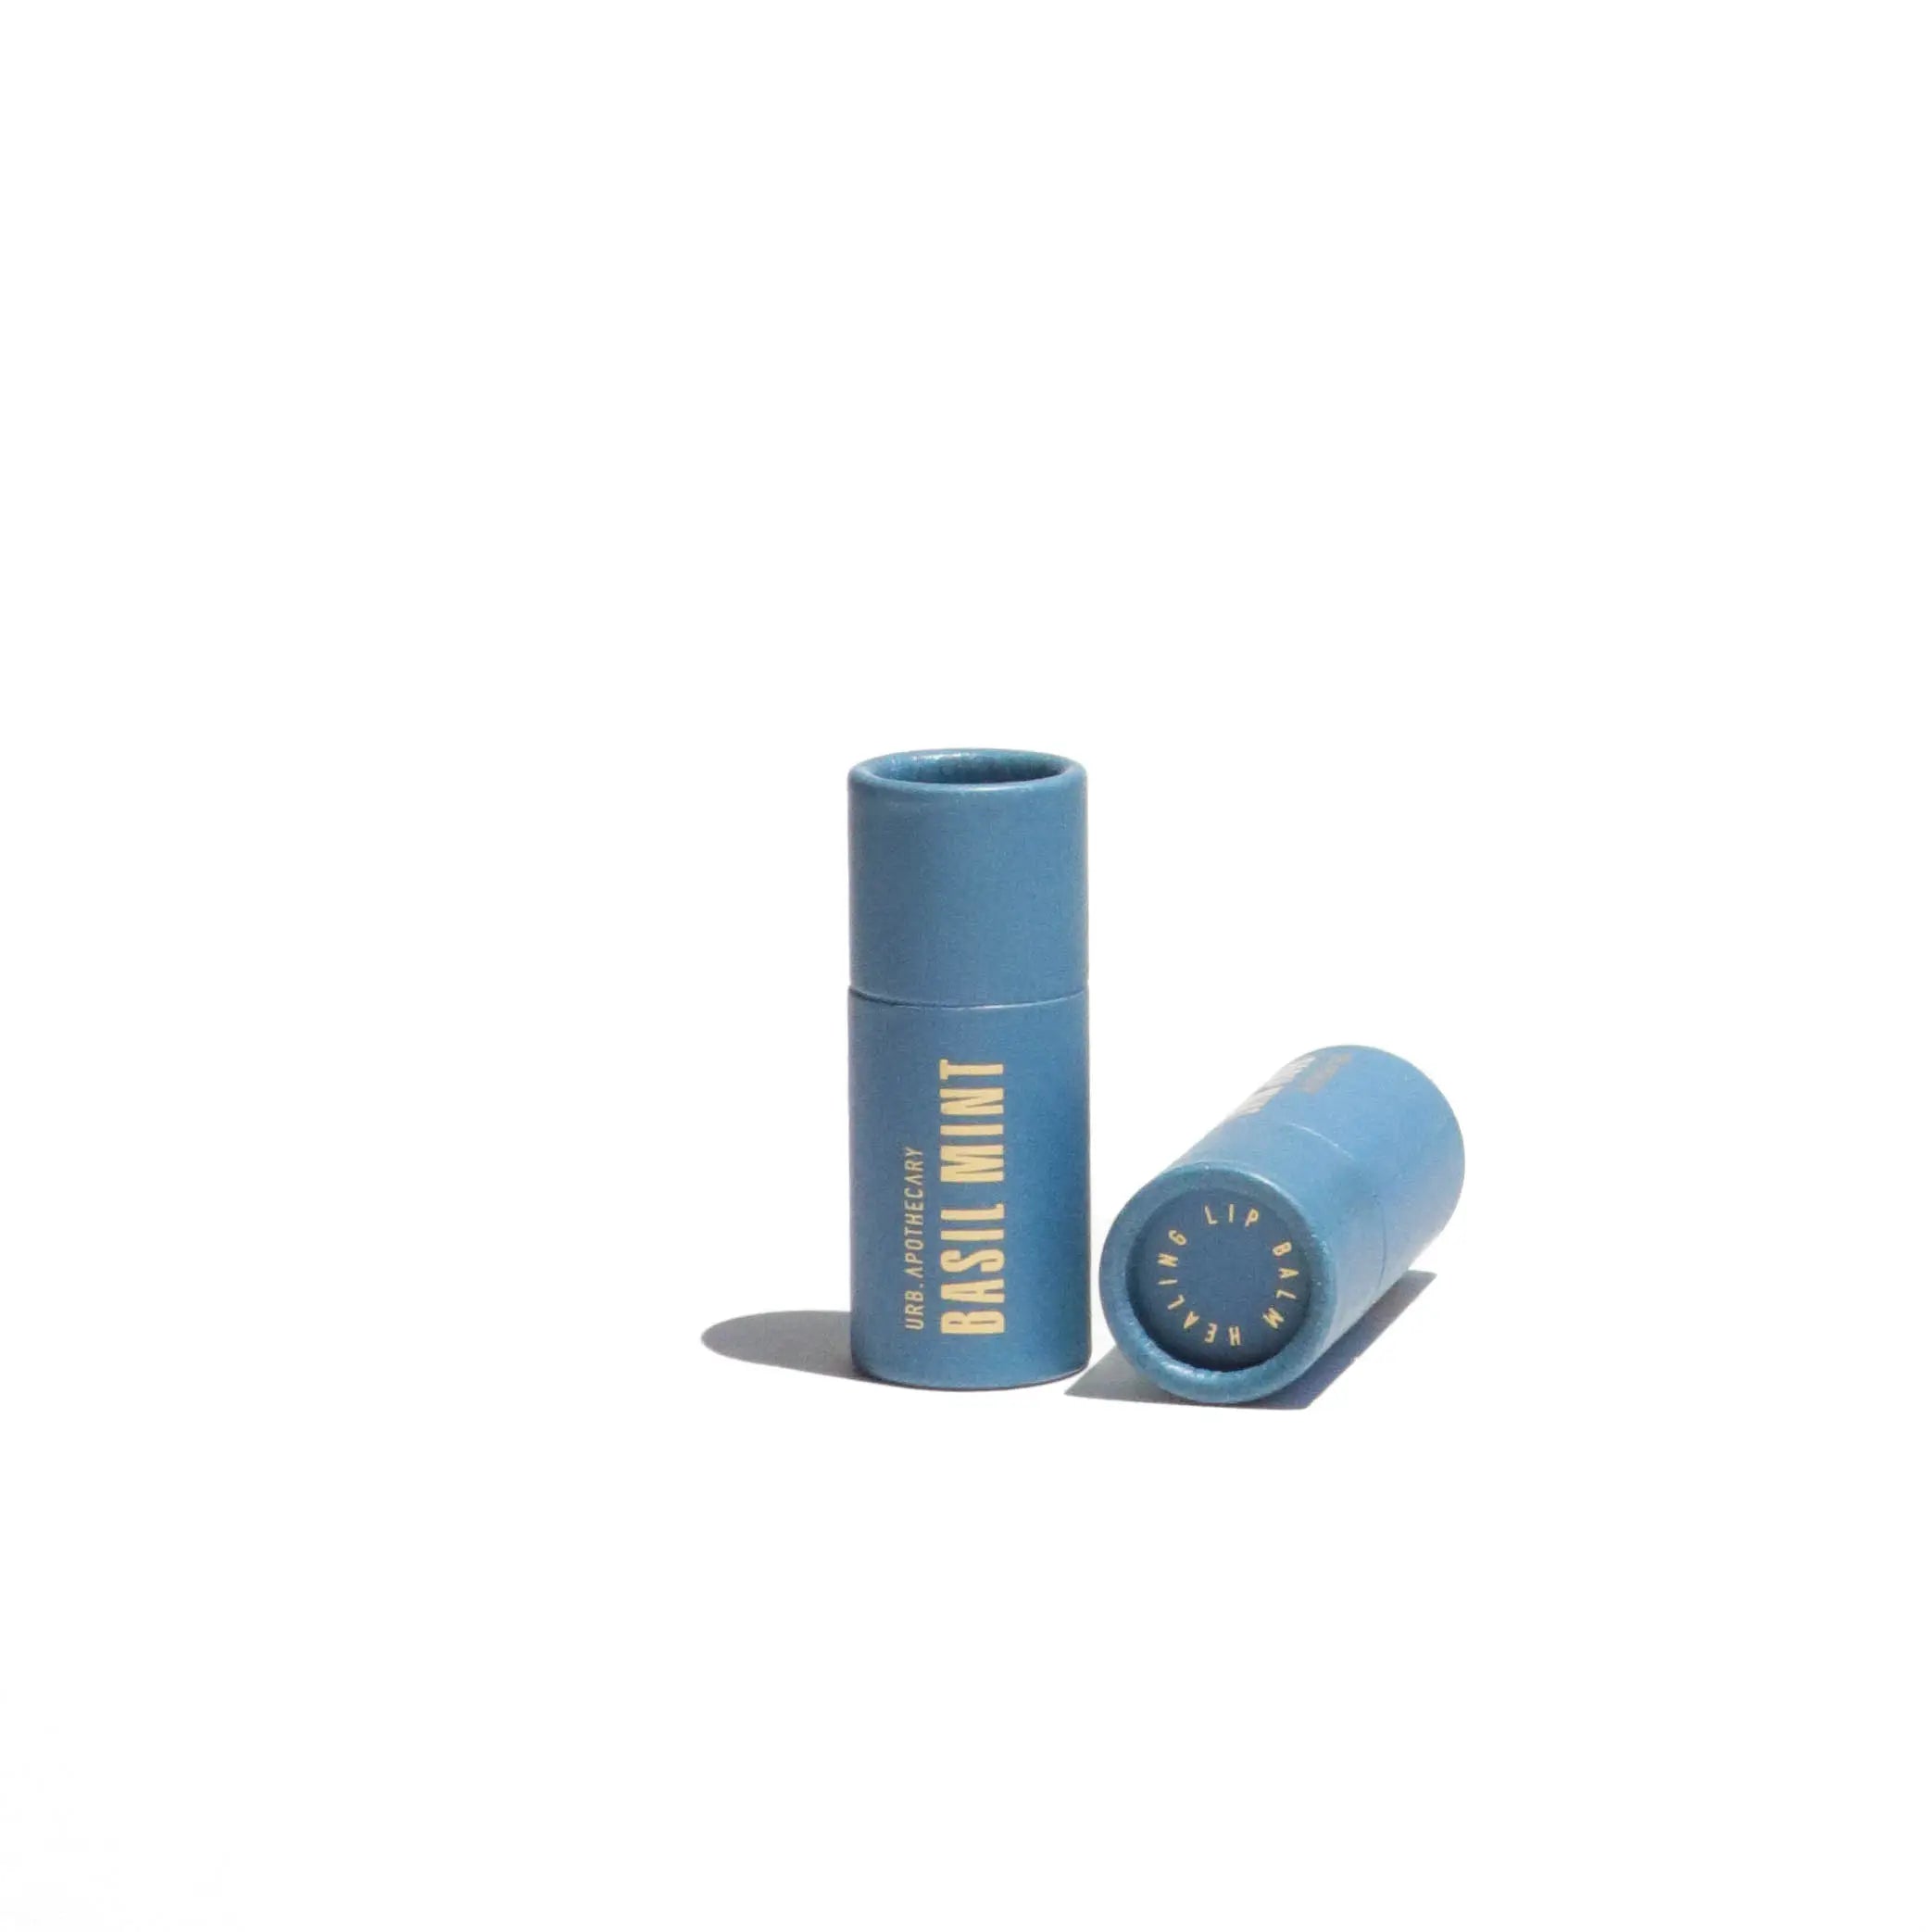 basil mint lip balm by URB Apothecary